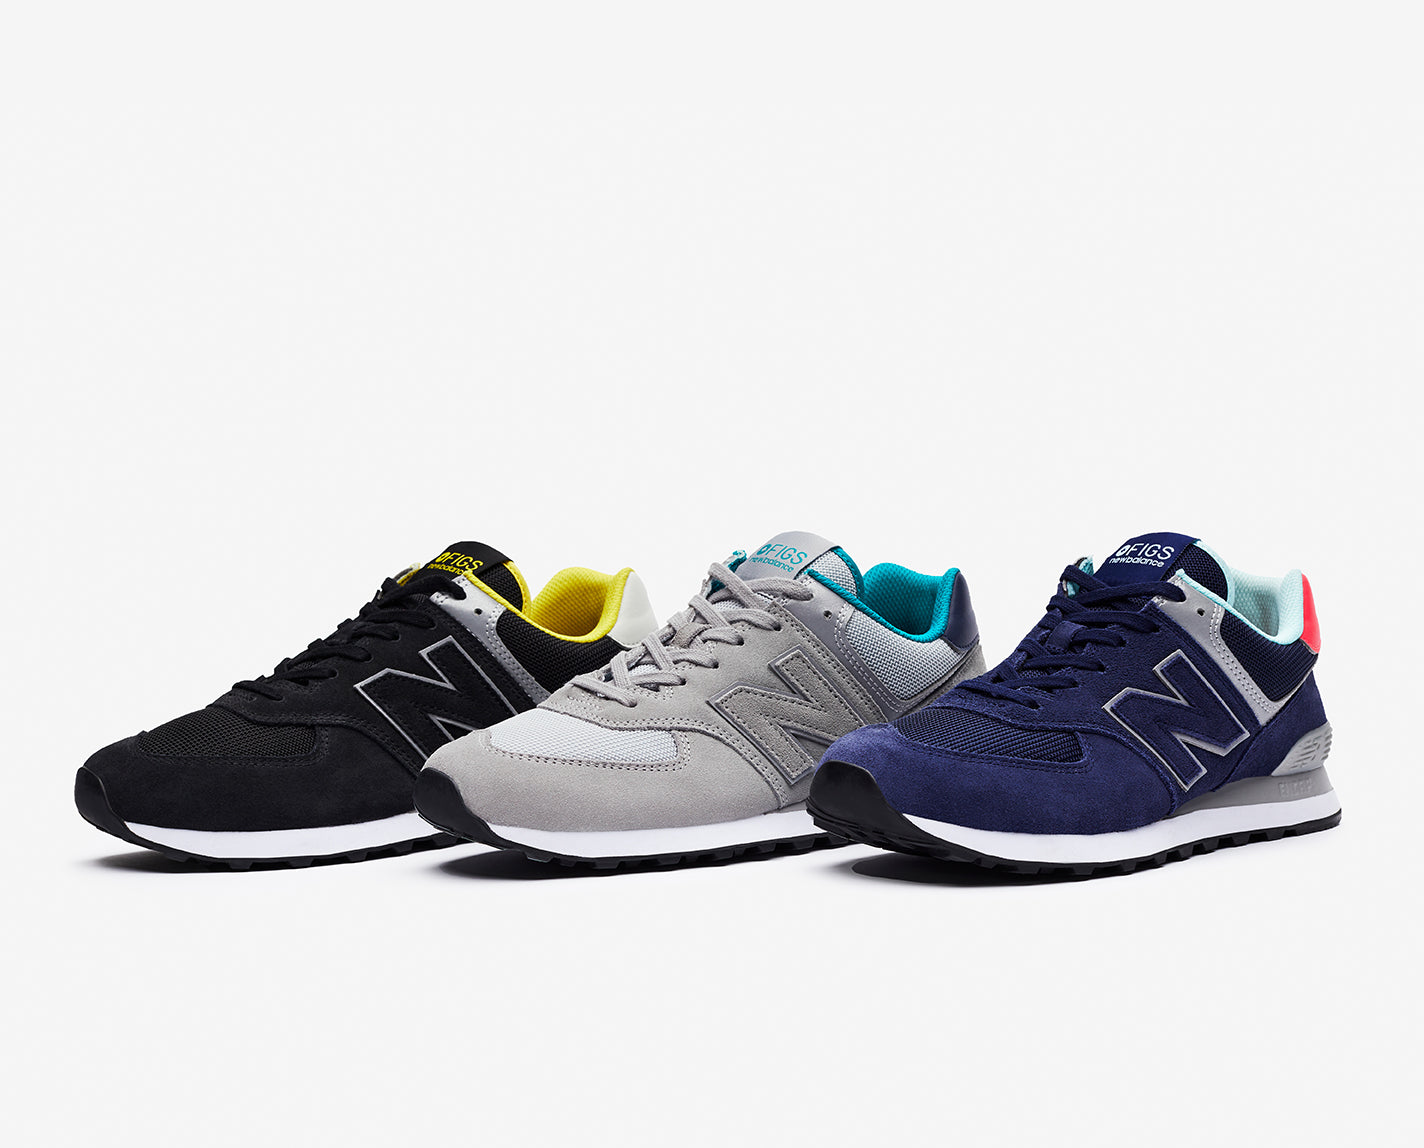 Figs New Balance Shoes - Styles Suggest